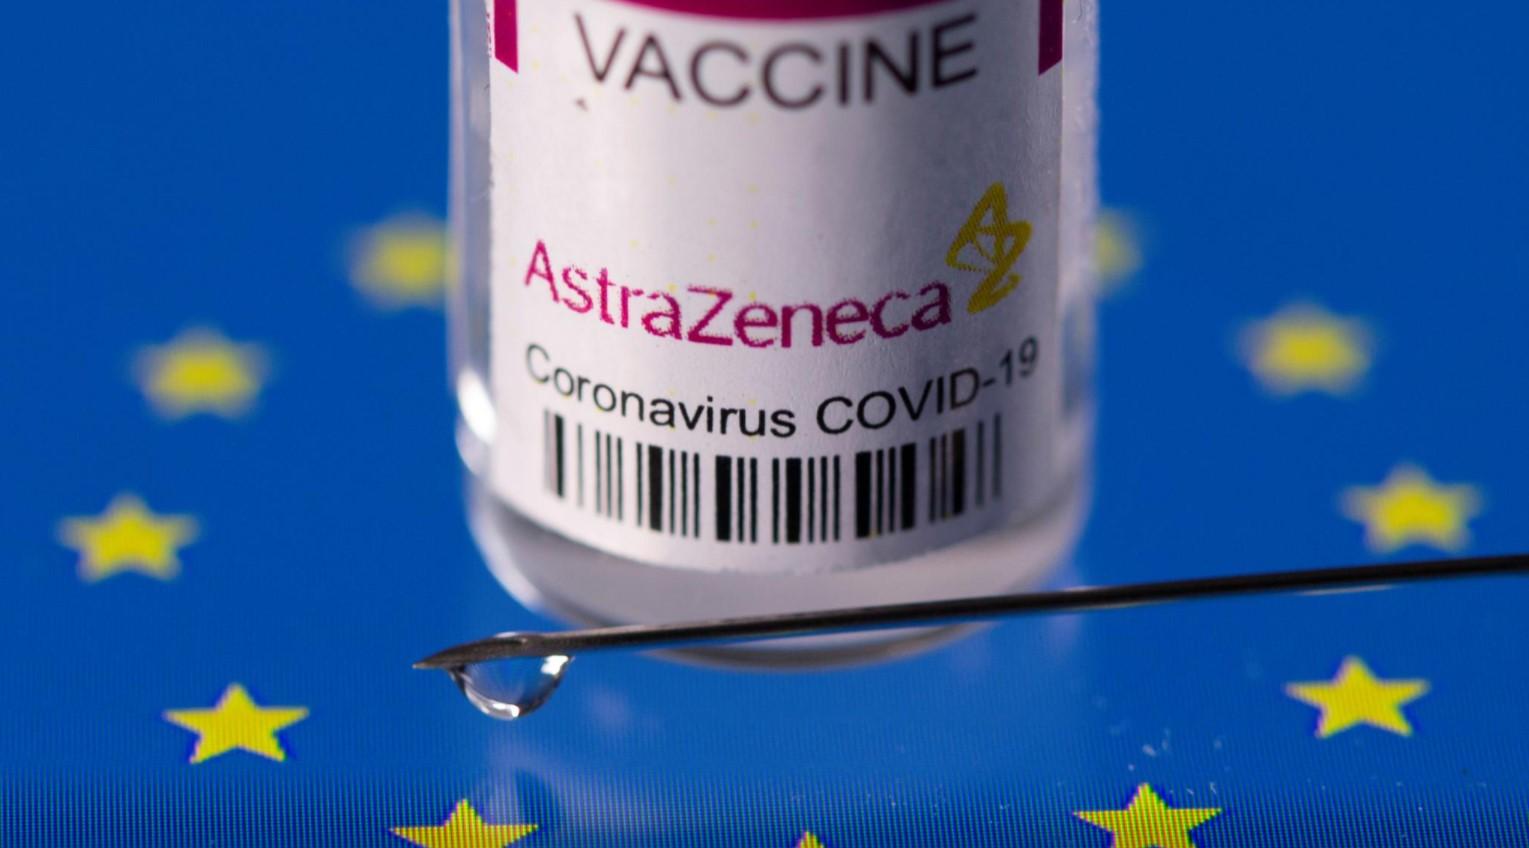 EU to get 107 million COVID doses by end of March, 30 million from AstraZeneca